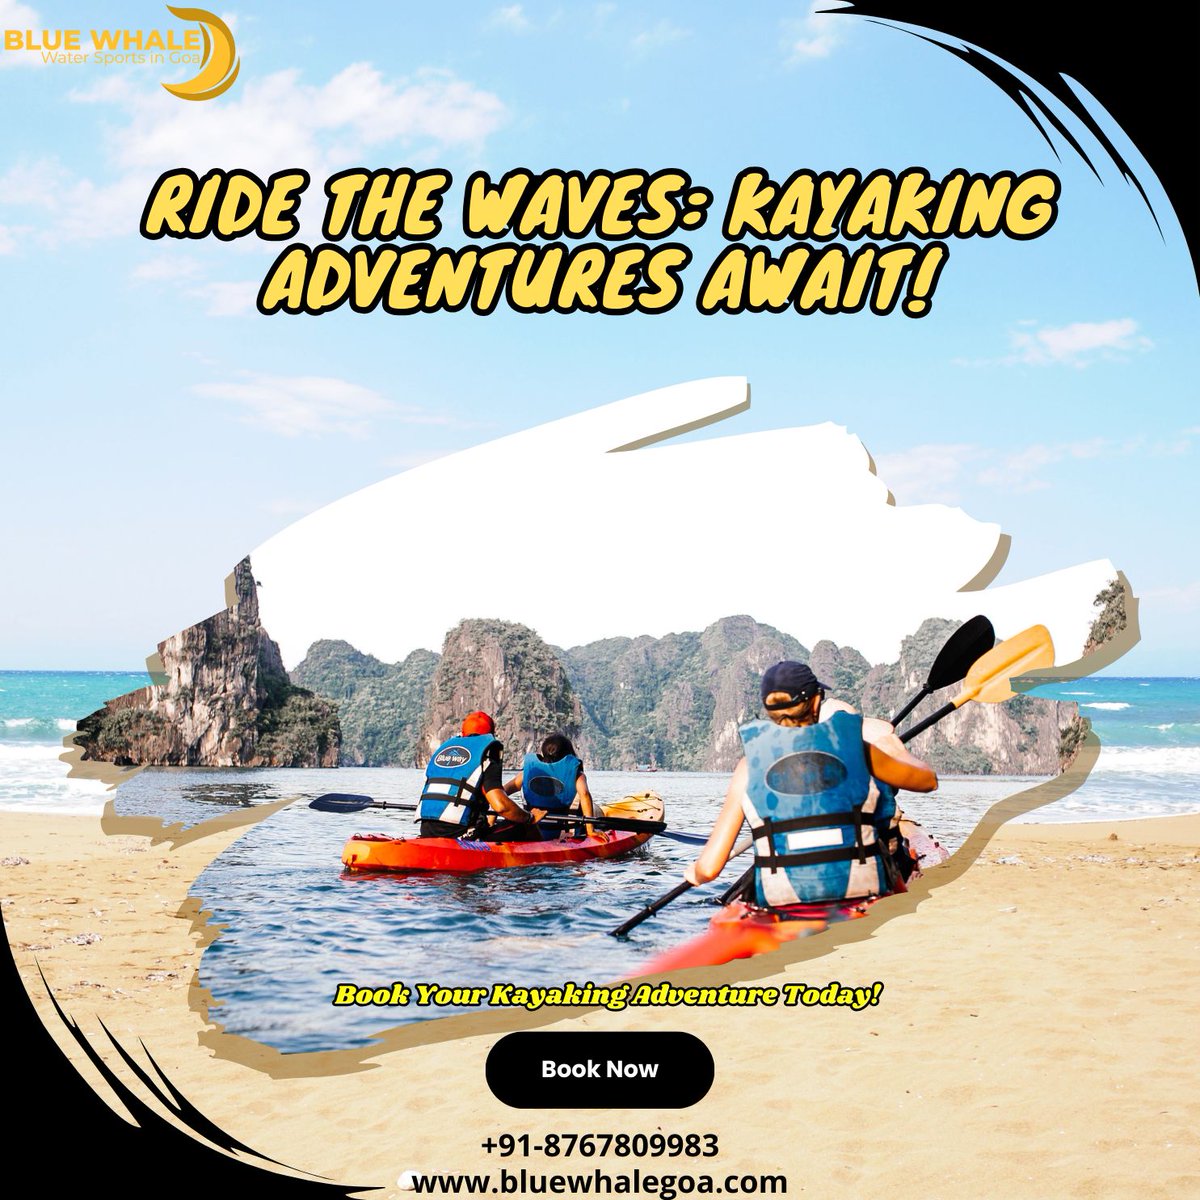 Embark on a thrilling kayaking adventure with Blue Whale Goa! 🌊 Explore Goa's waterways like never before. Book now! For bookings, contact us at: 📞 Mob: +91 8767809983  #BlueWhaleGoa #Kayaking